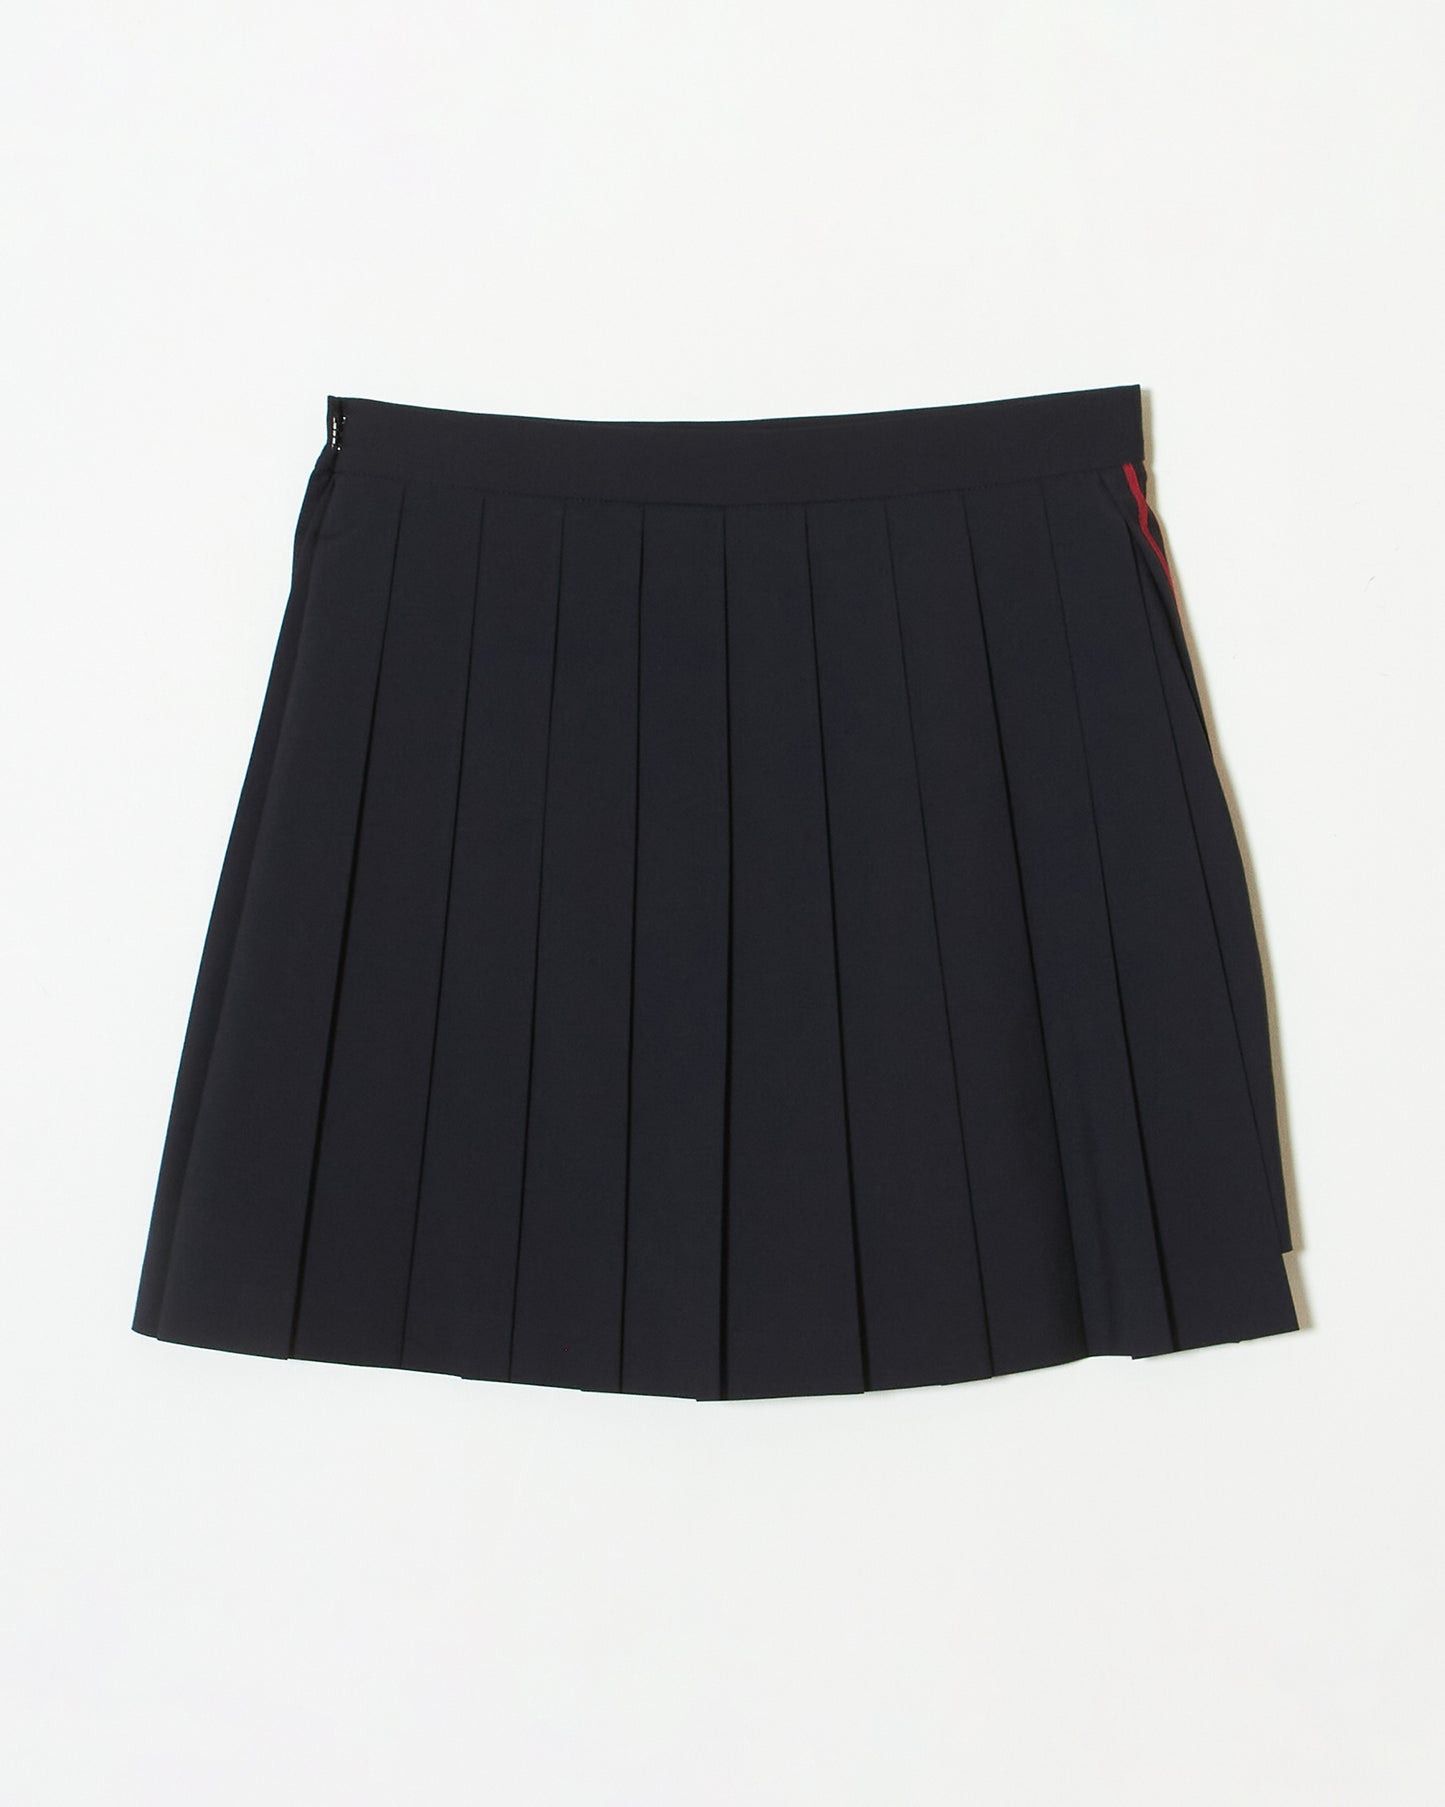 sailor skirt pants【Delivery in August 2023】